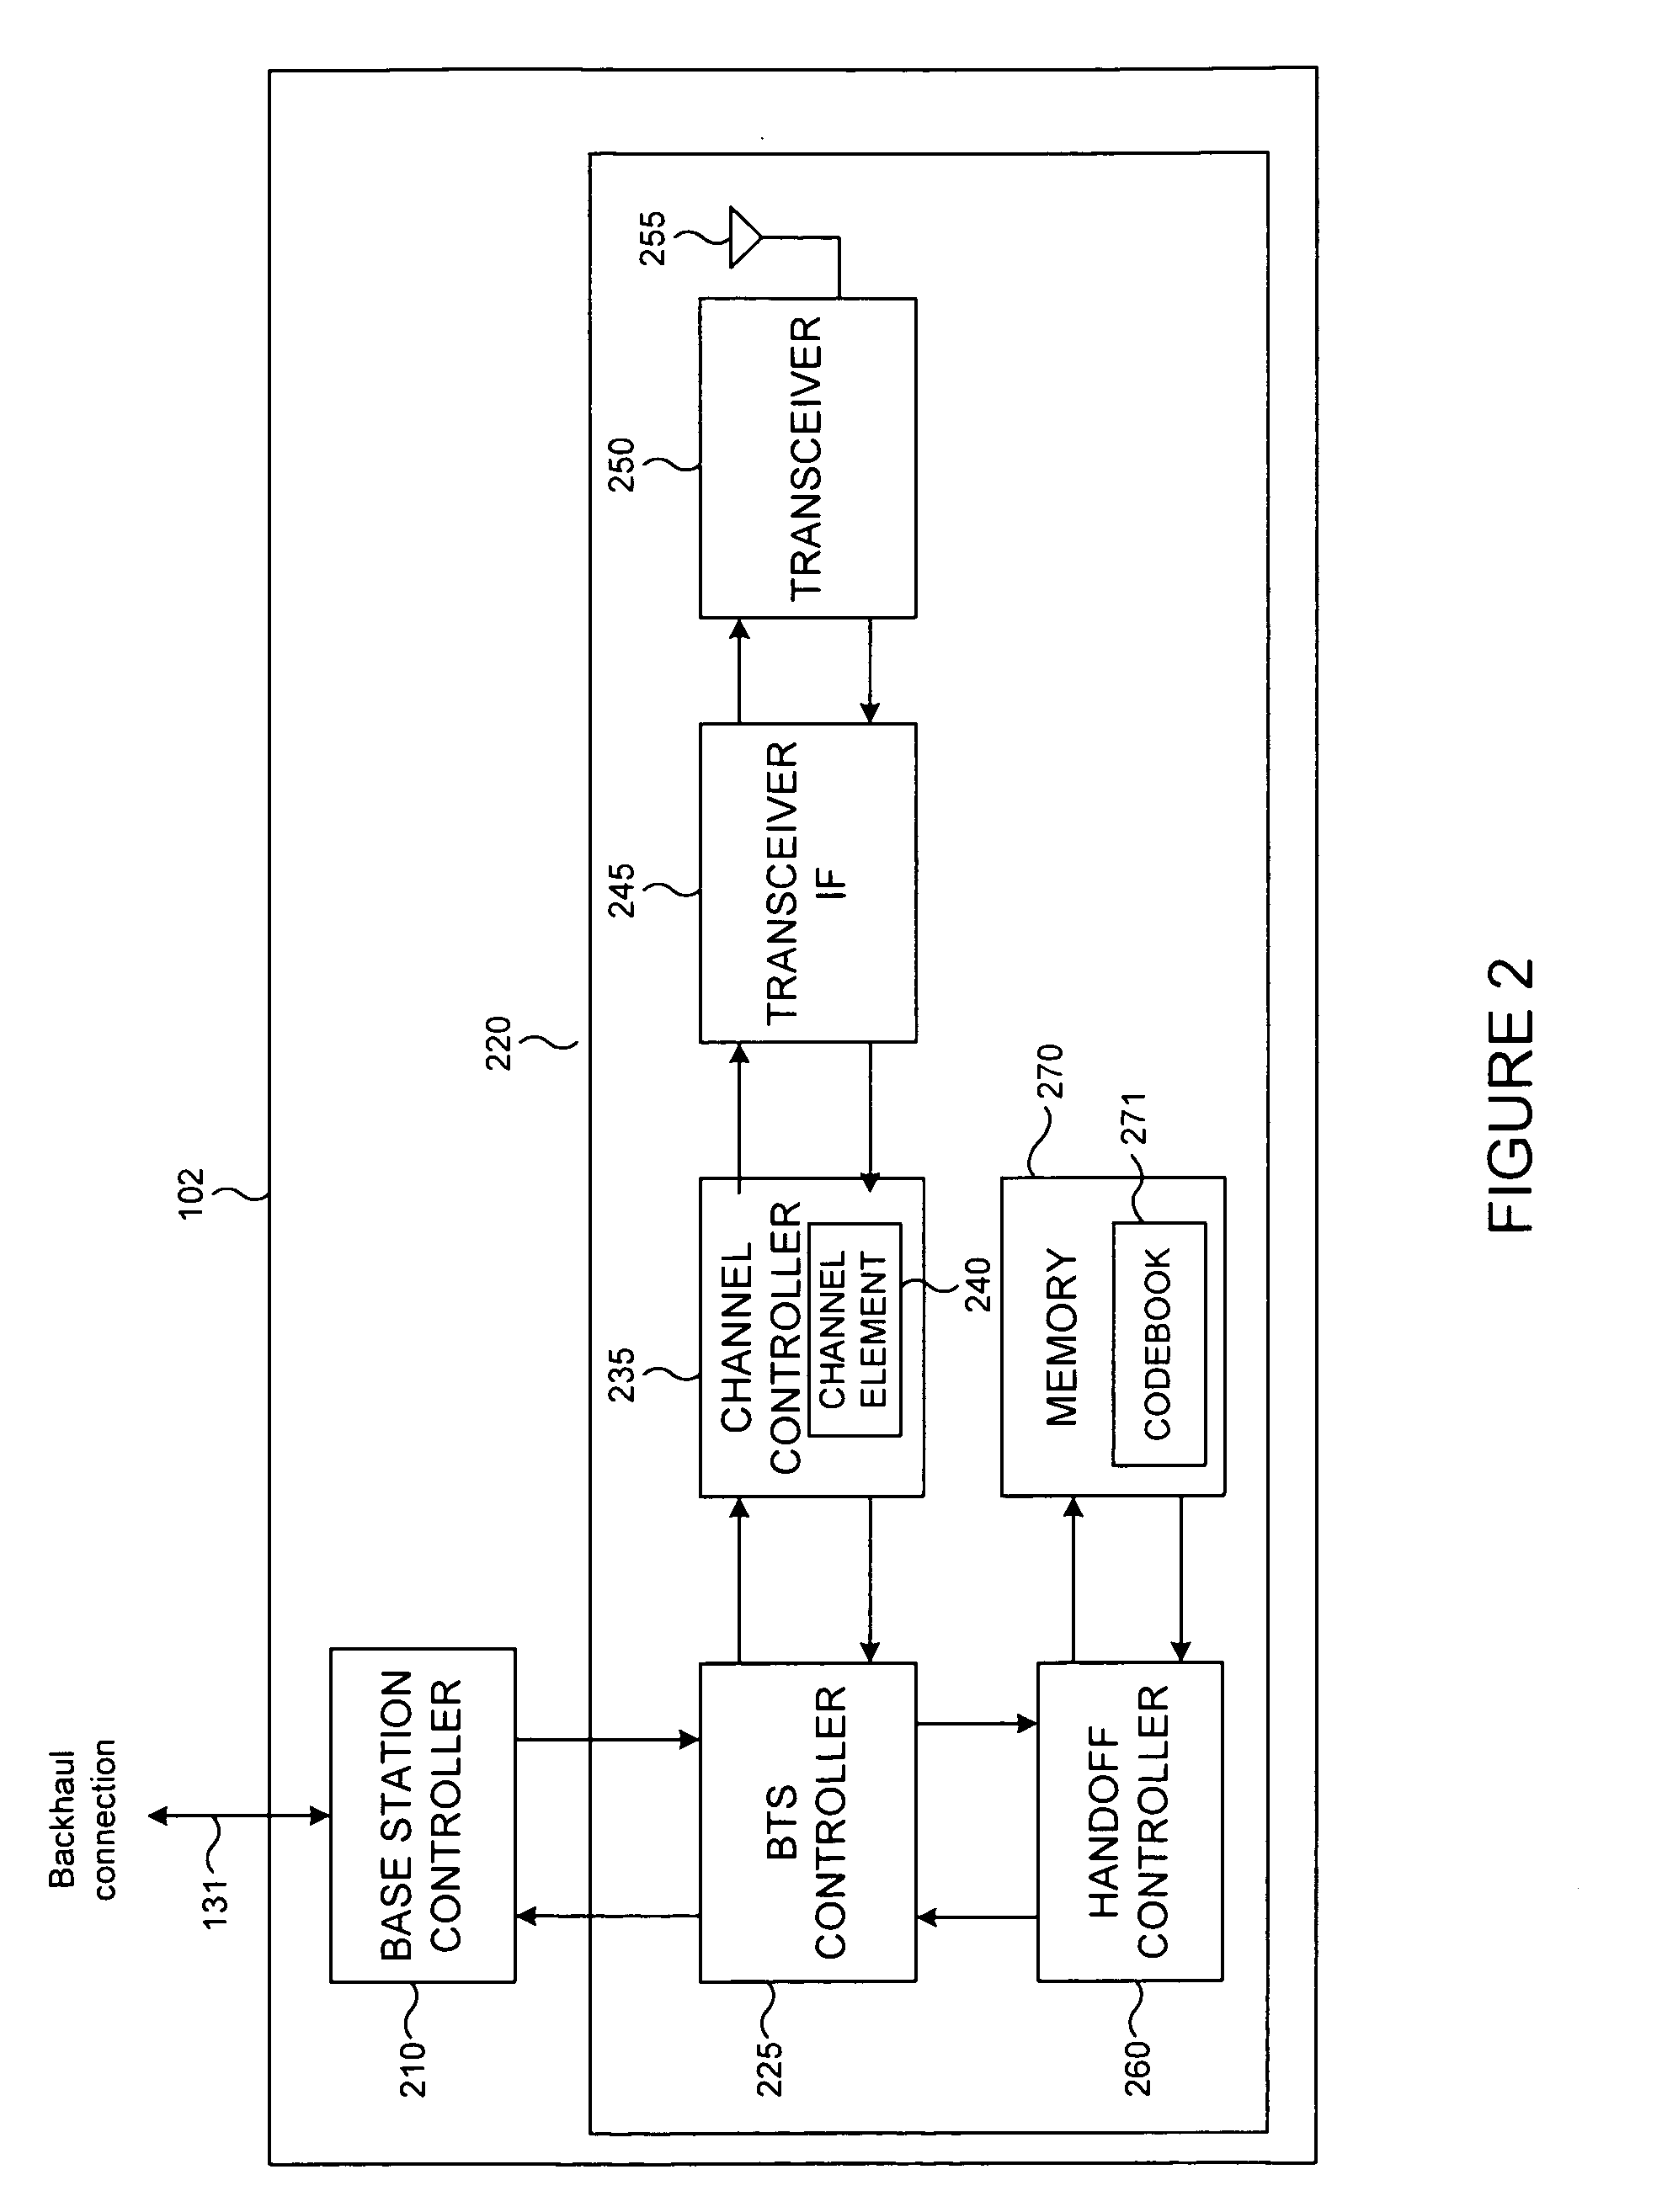 Method and apparatus for multiple input multiple output (MIMO) transmit beamforming